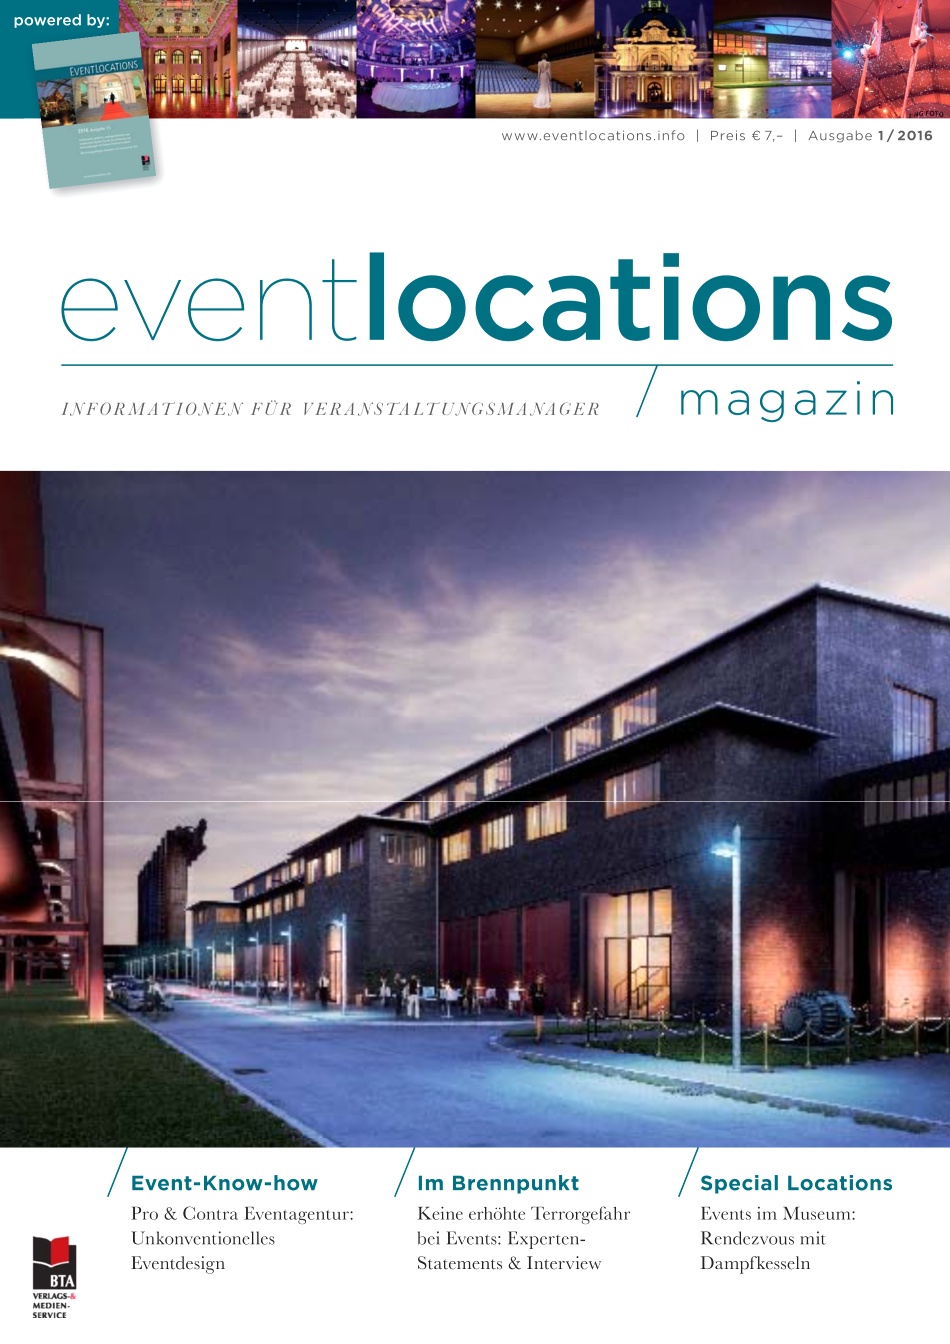 eventlocations Event-Know-how Brennpunkt